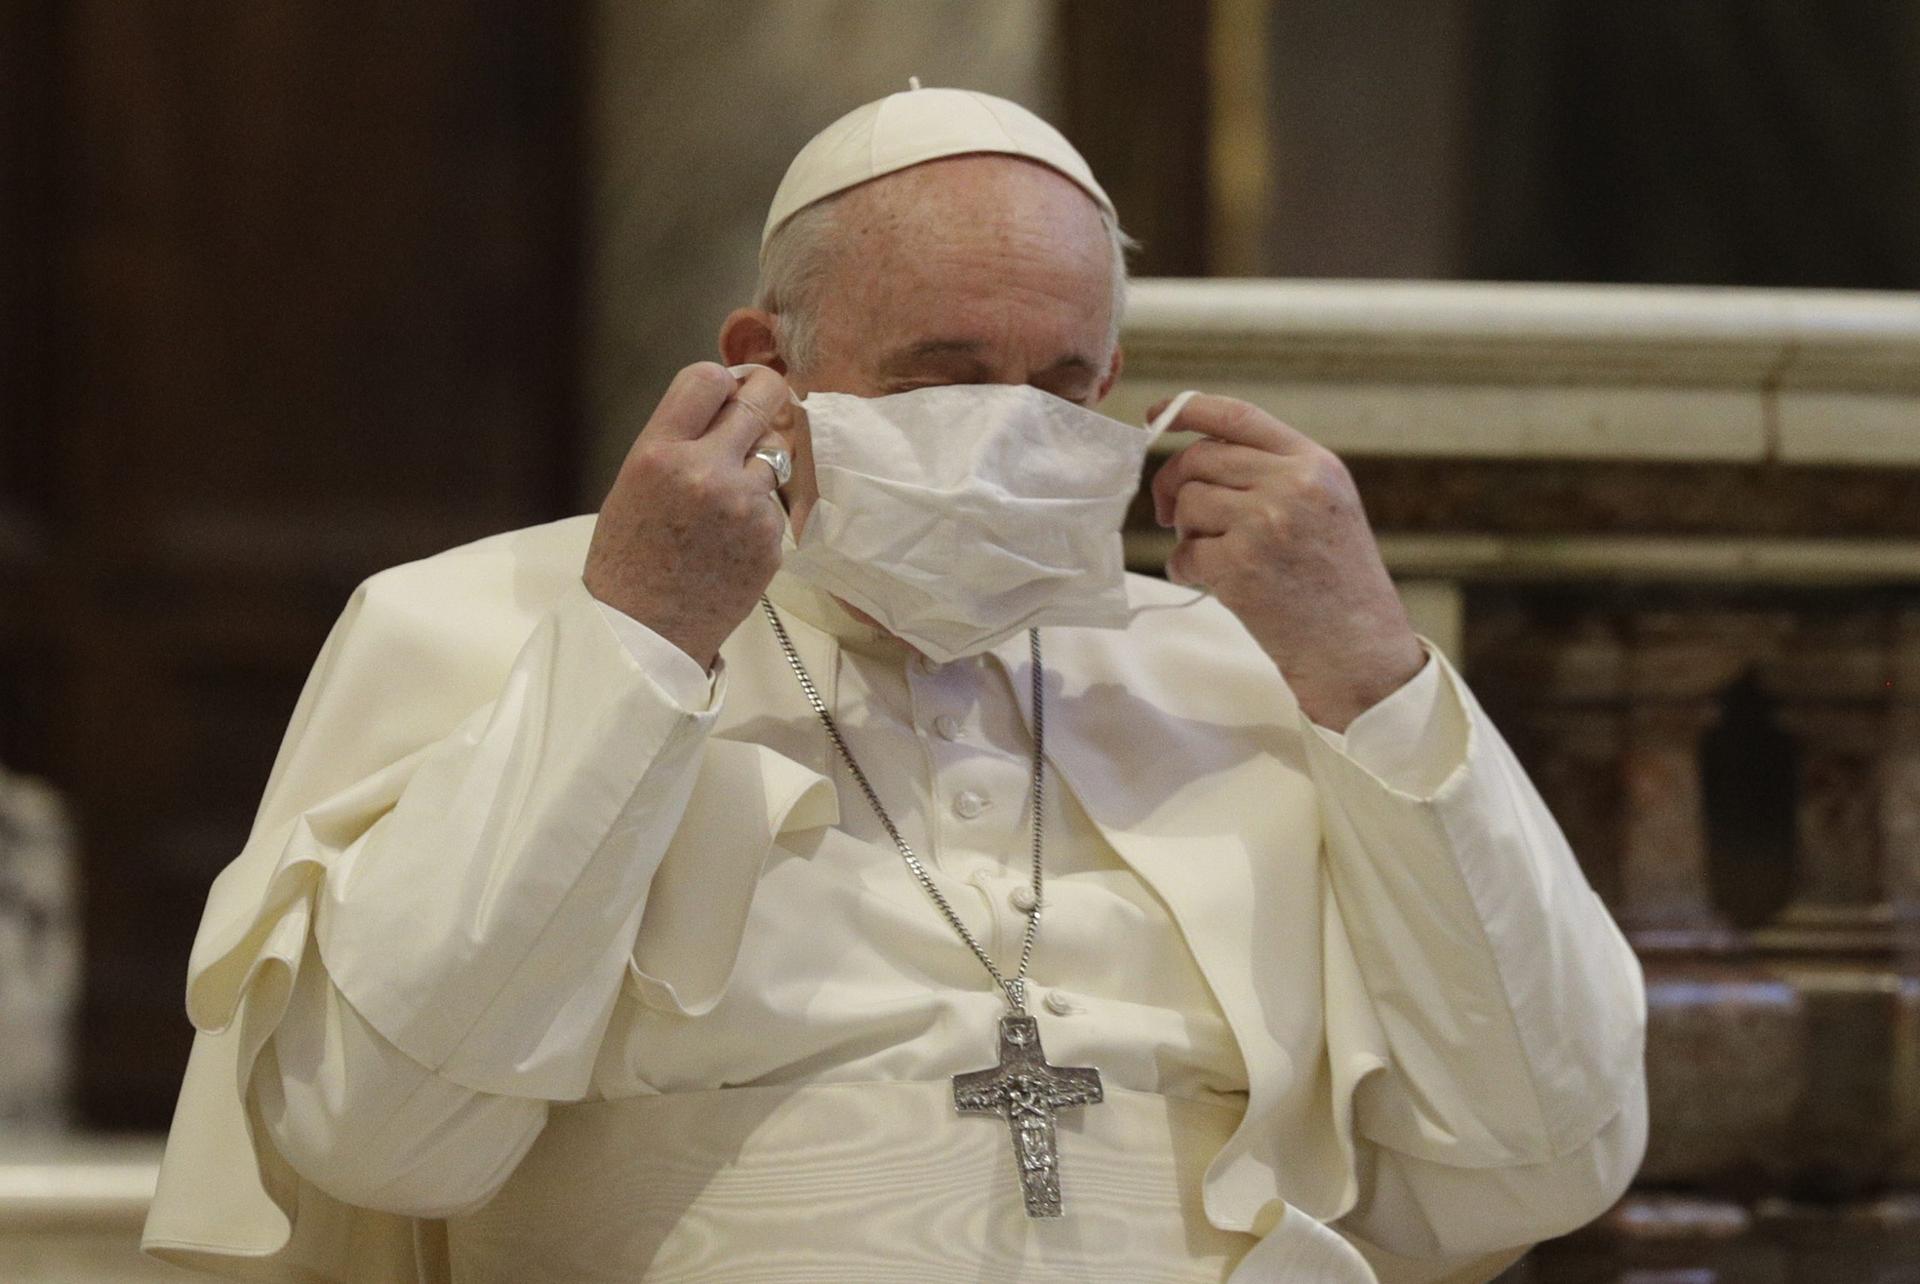 Pope Francis in 2020: A pandemic year in pictures